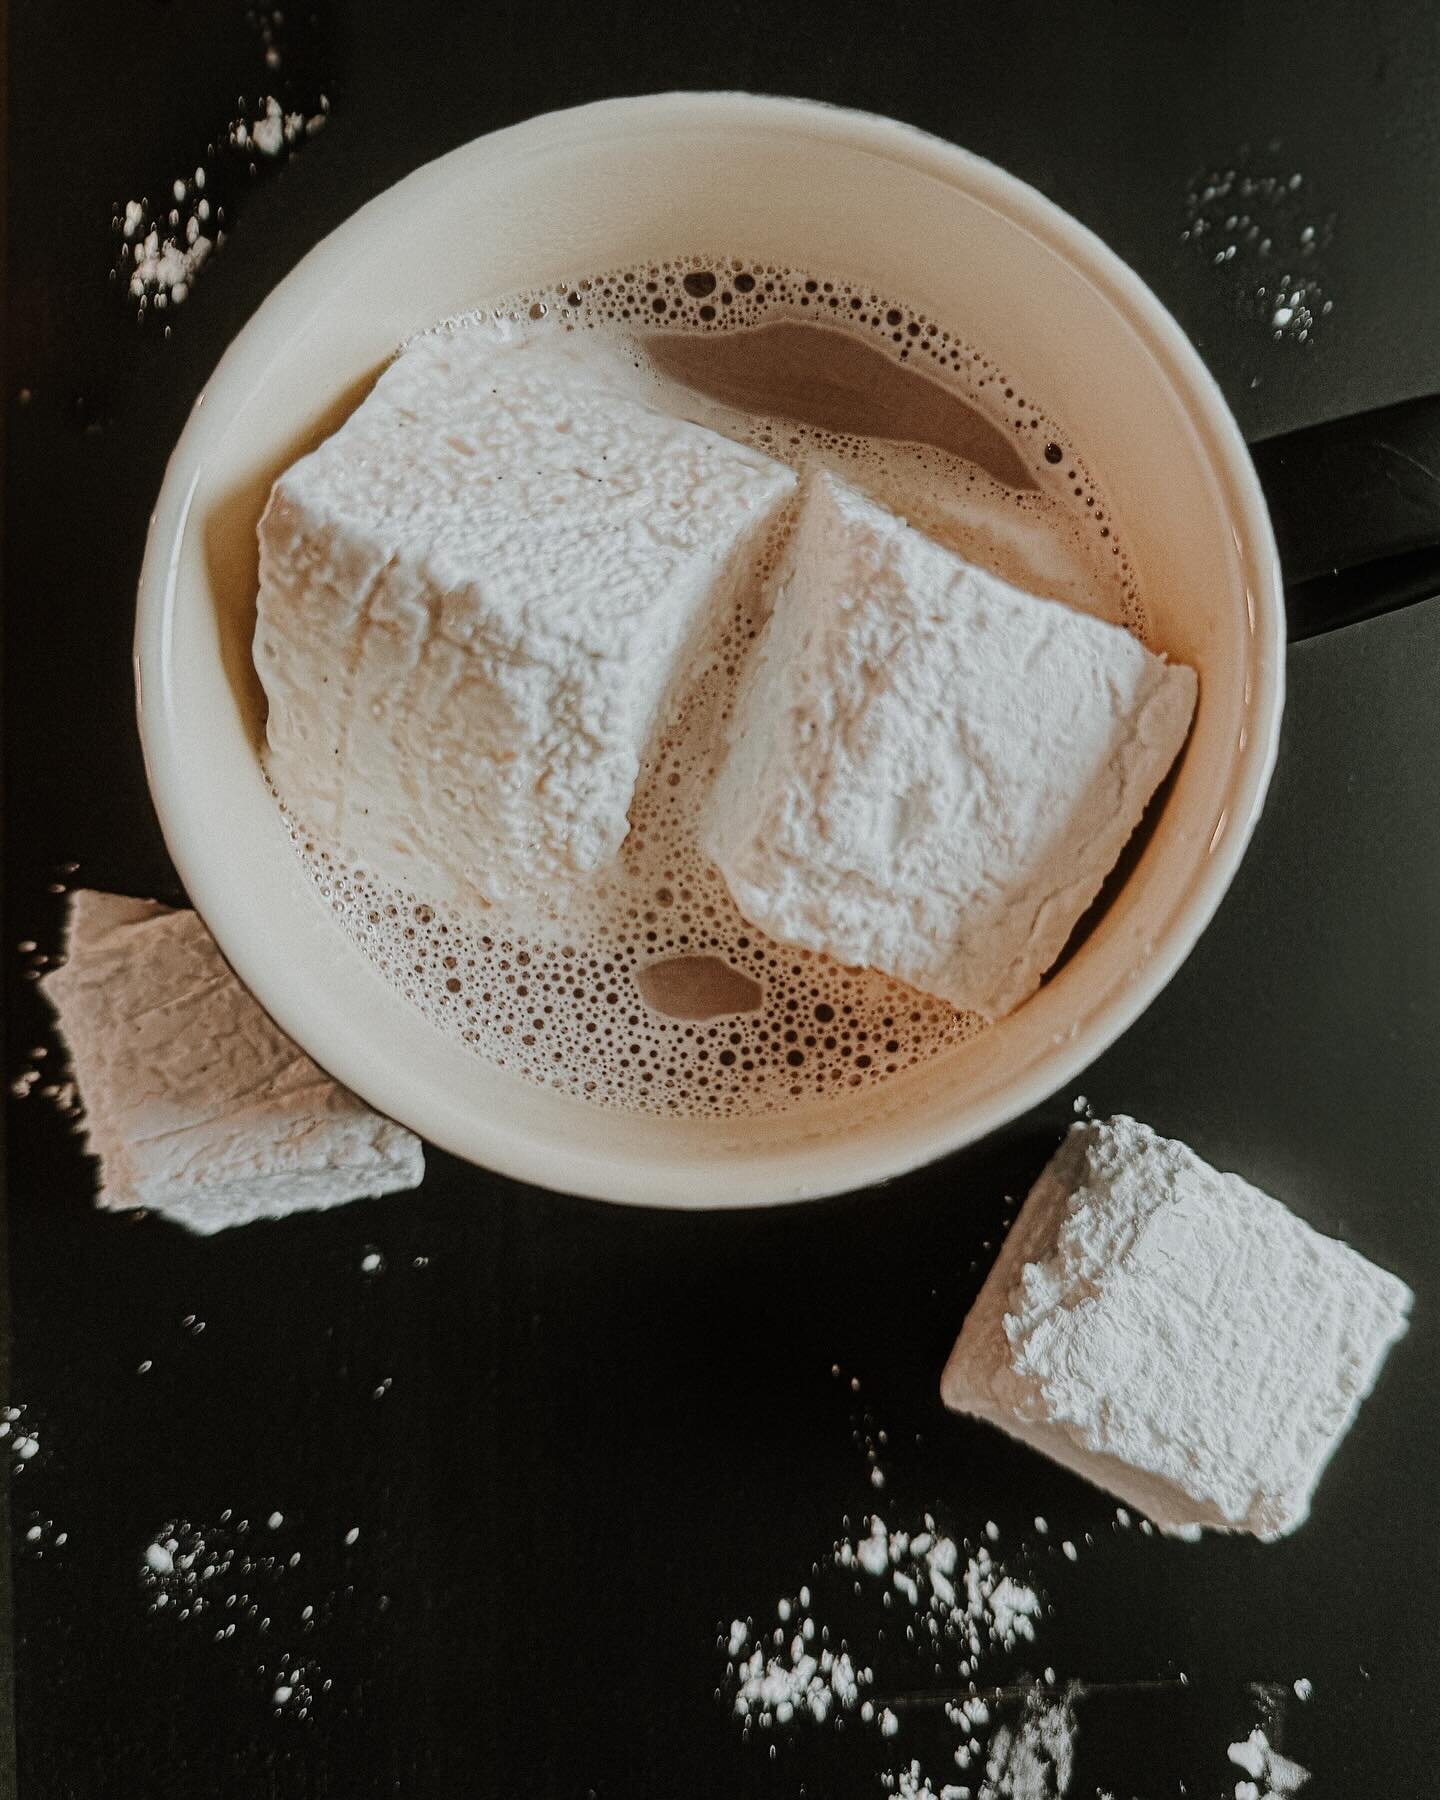 Let&rsquo;s not pretend jet puffed marshmallows don&rsquo;t have their rightful and delicious place in this world, but homemade vanilla bean marshmallows do it for me, too. 🤤

☕️
☕️
☕️

#grazingtable #grazingboard #charcuterie #dessertboard #dessert